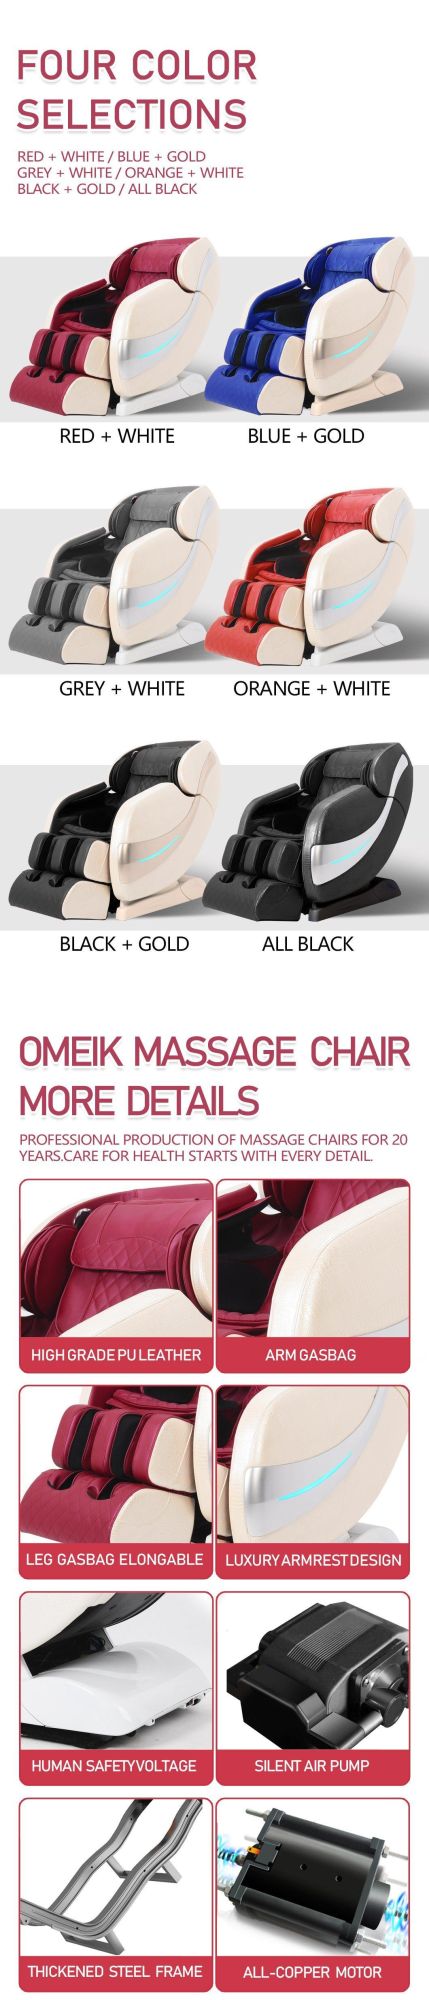 Full Body Stretch Massage Chair 2020 Popular Health Care Product Best Gifts for Elderly Parents